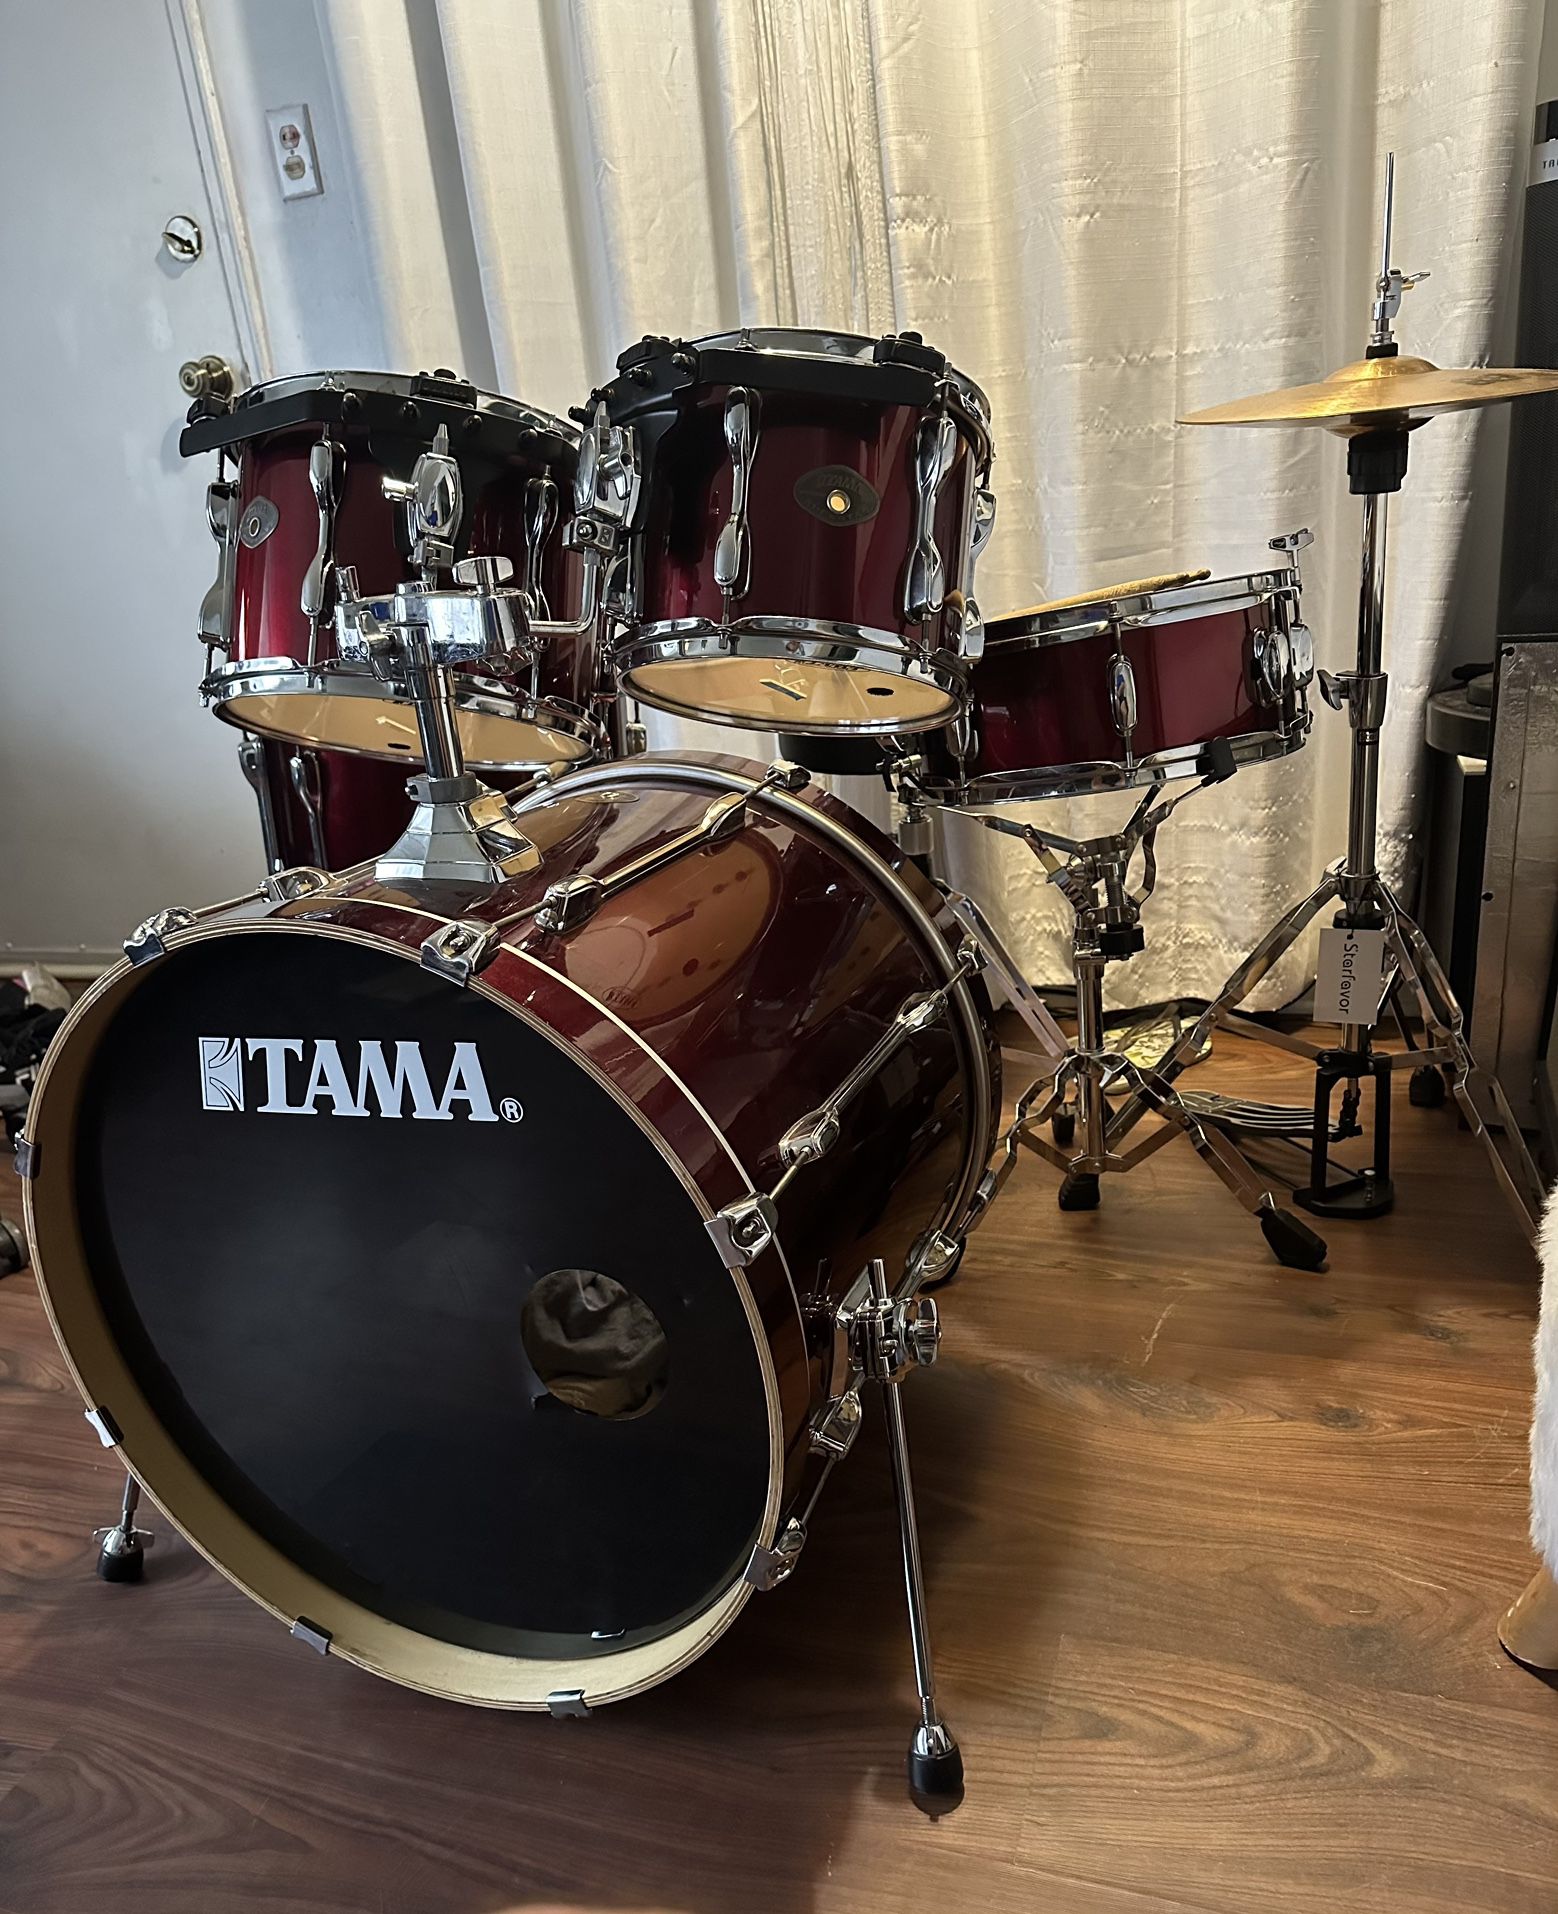 Tama drums Rockstar with hit hat Sabian and stands